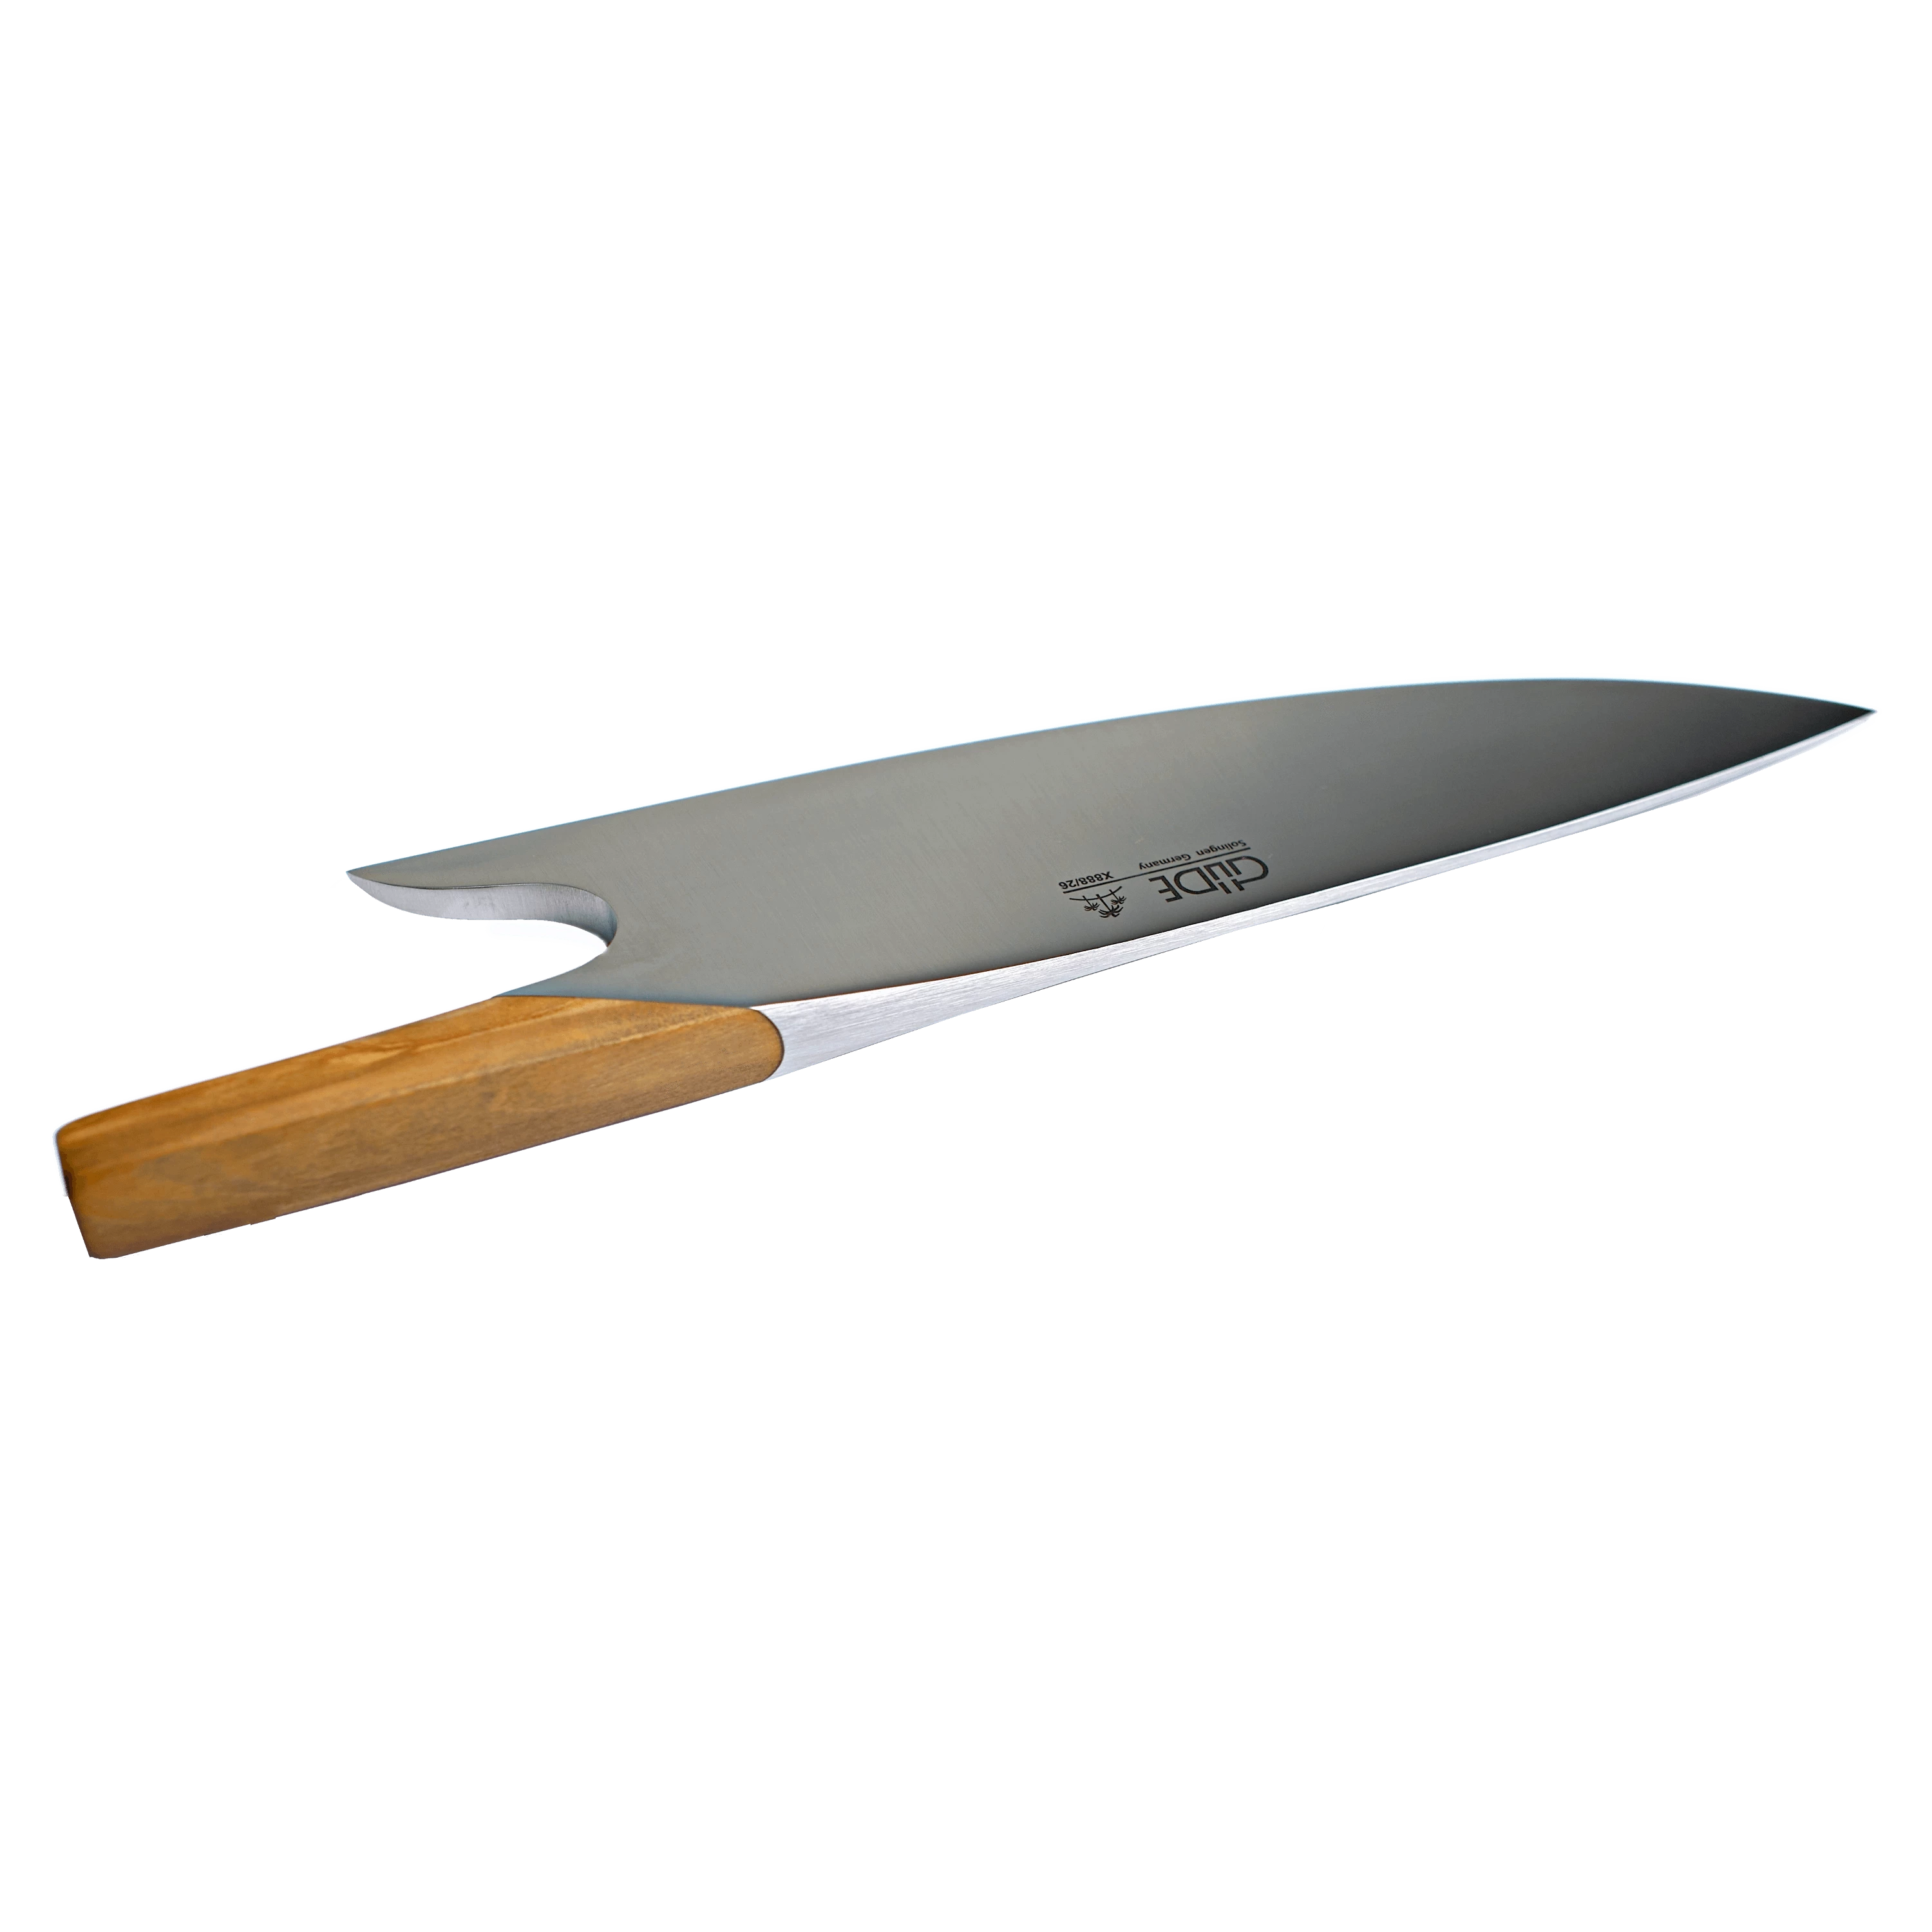 THE KNIFE | Blade length 10-inch | Forged Steel  Olive wood handle